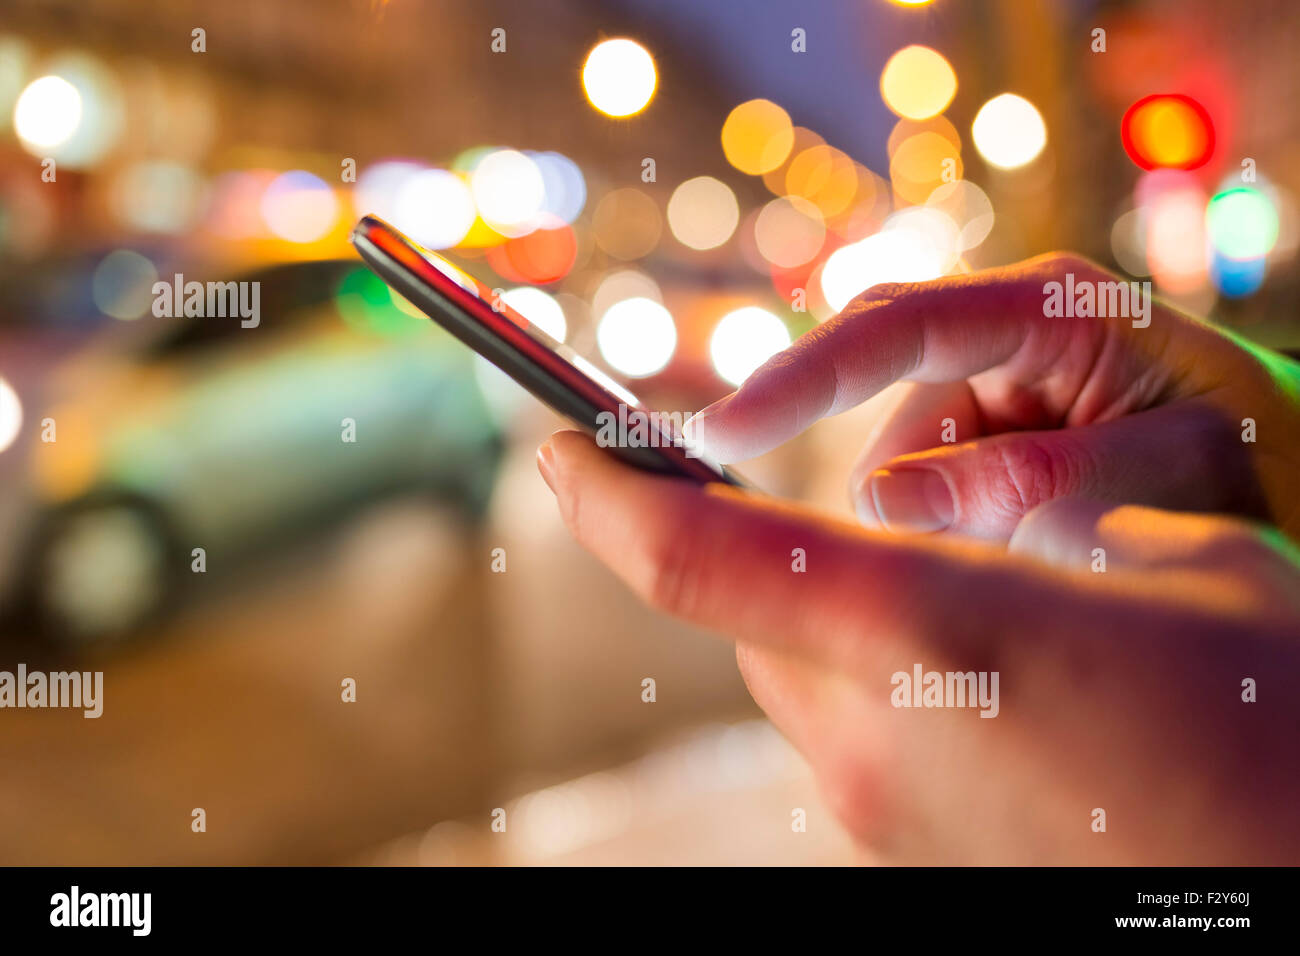 Man using his Mobile Phone in the street, night light bokeh Background Stock Photo